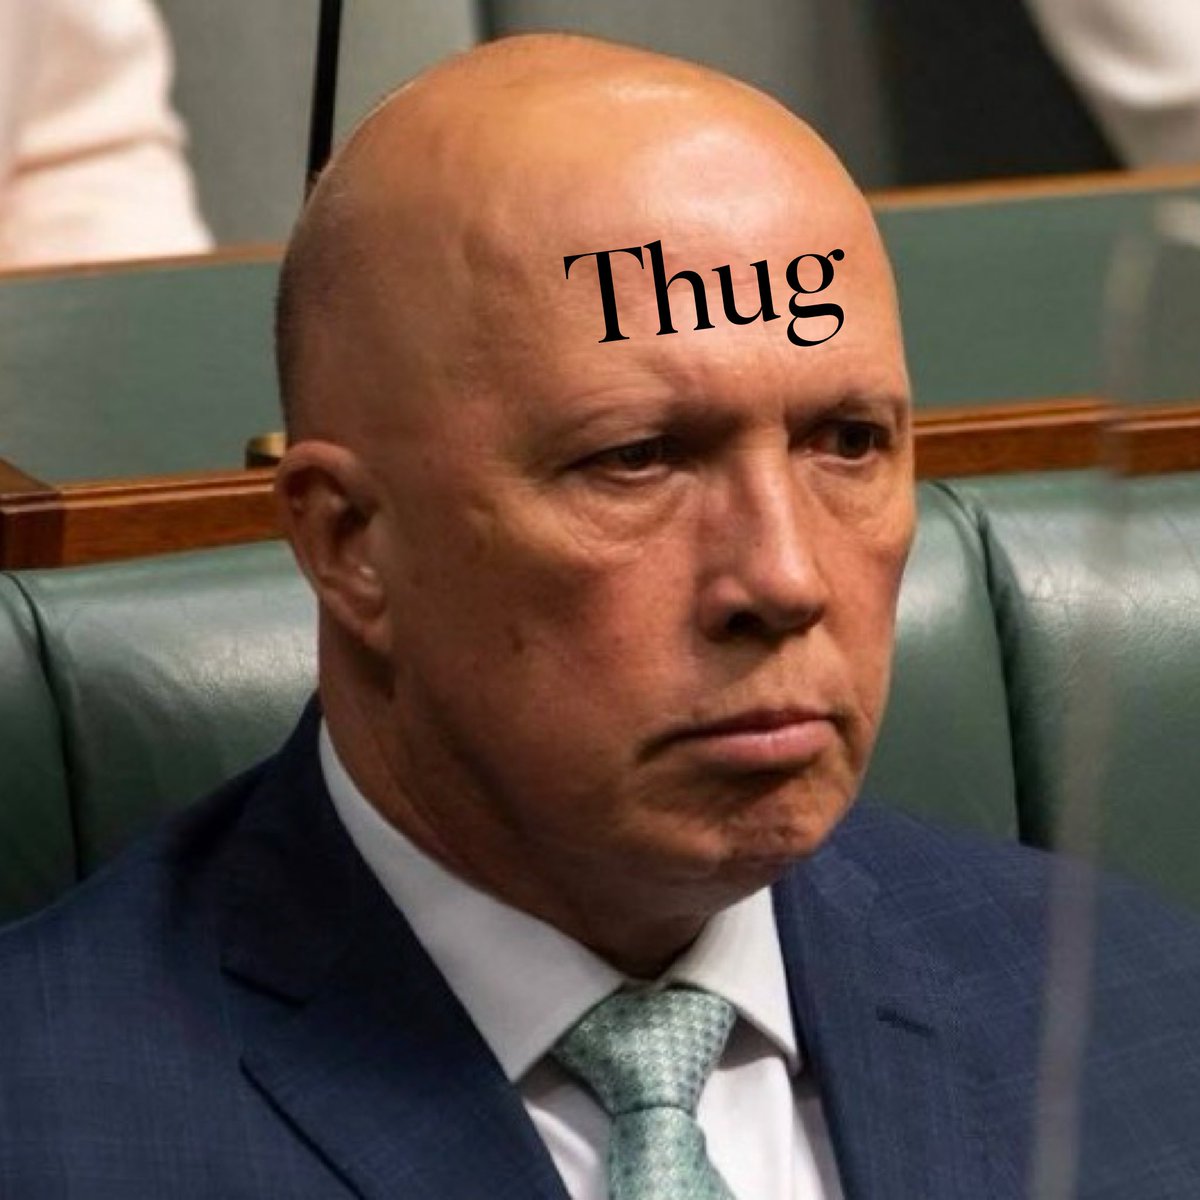 The lights are on but no one’s home…
Might as well face it he’s addicted to thug #ThugLife 
#ThugDutton #SpudDud